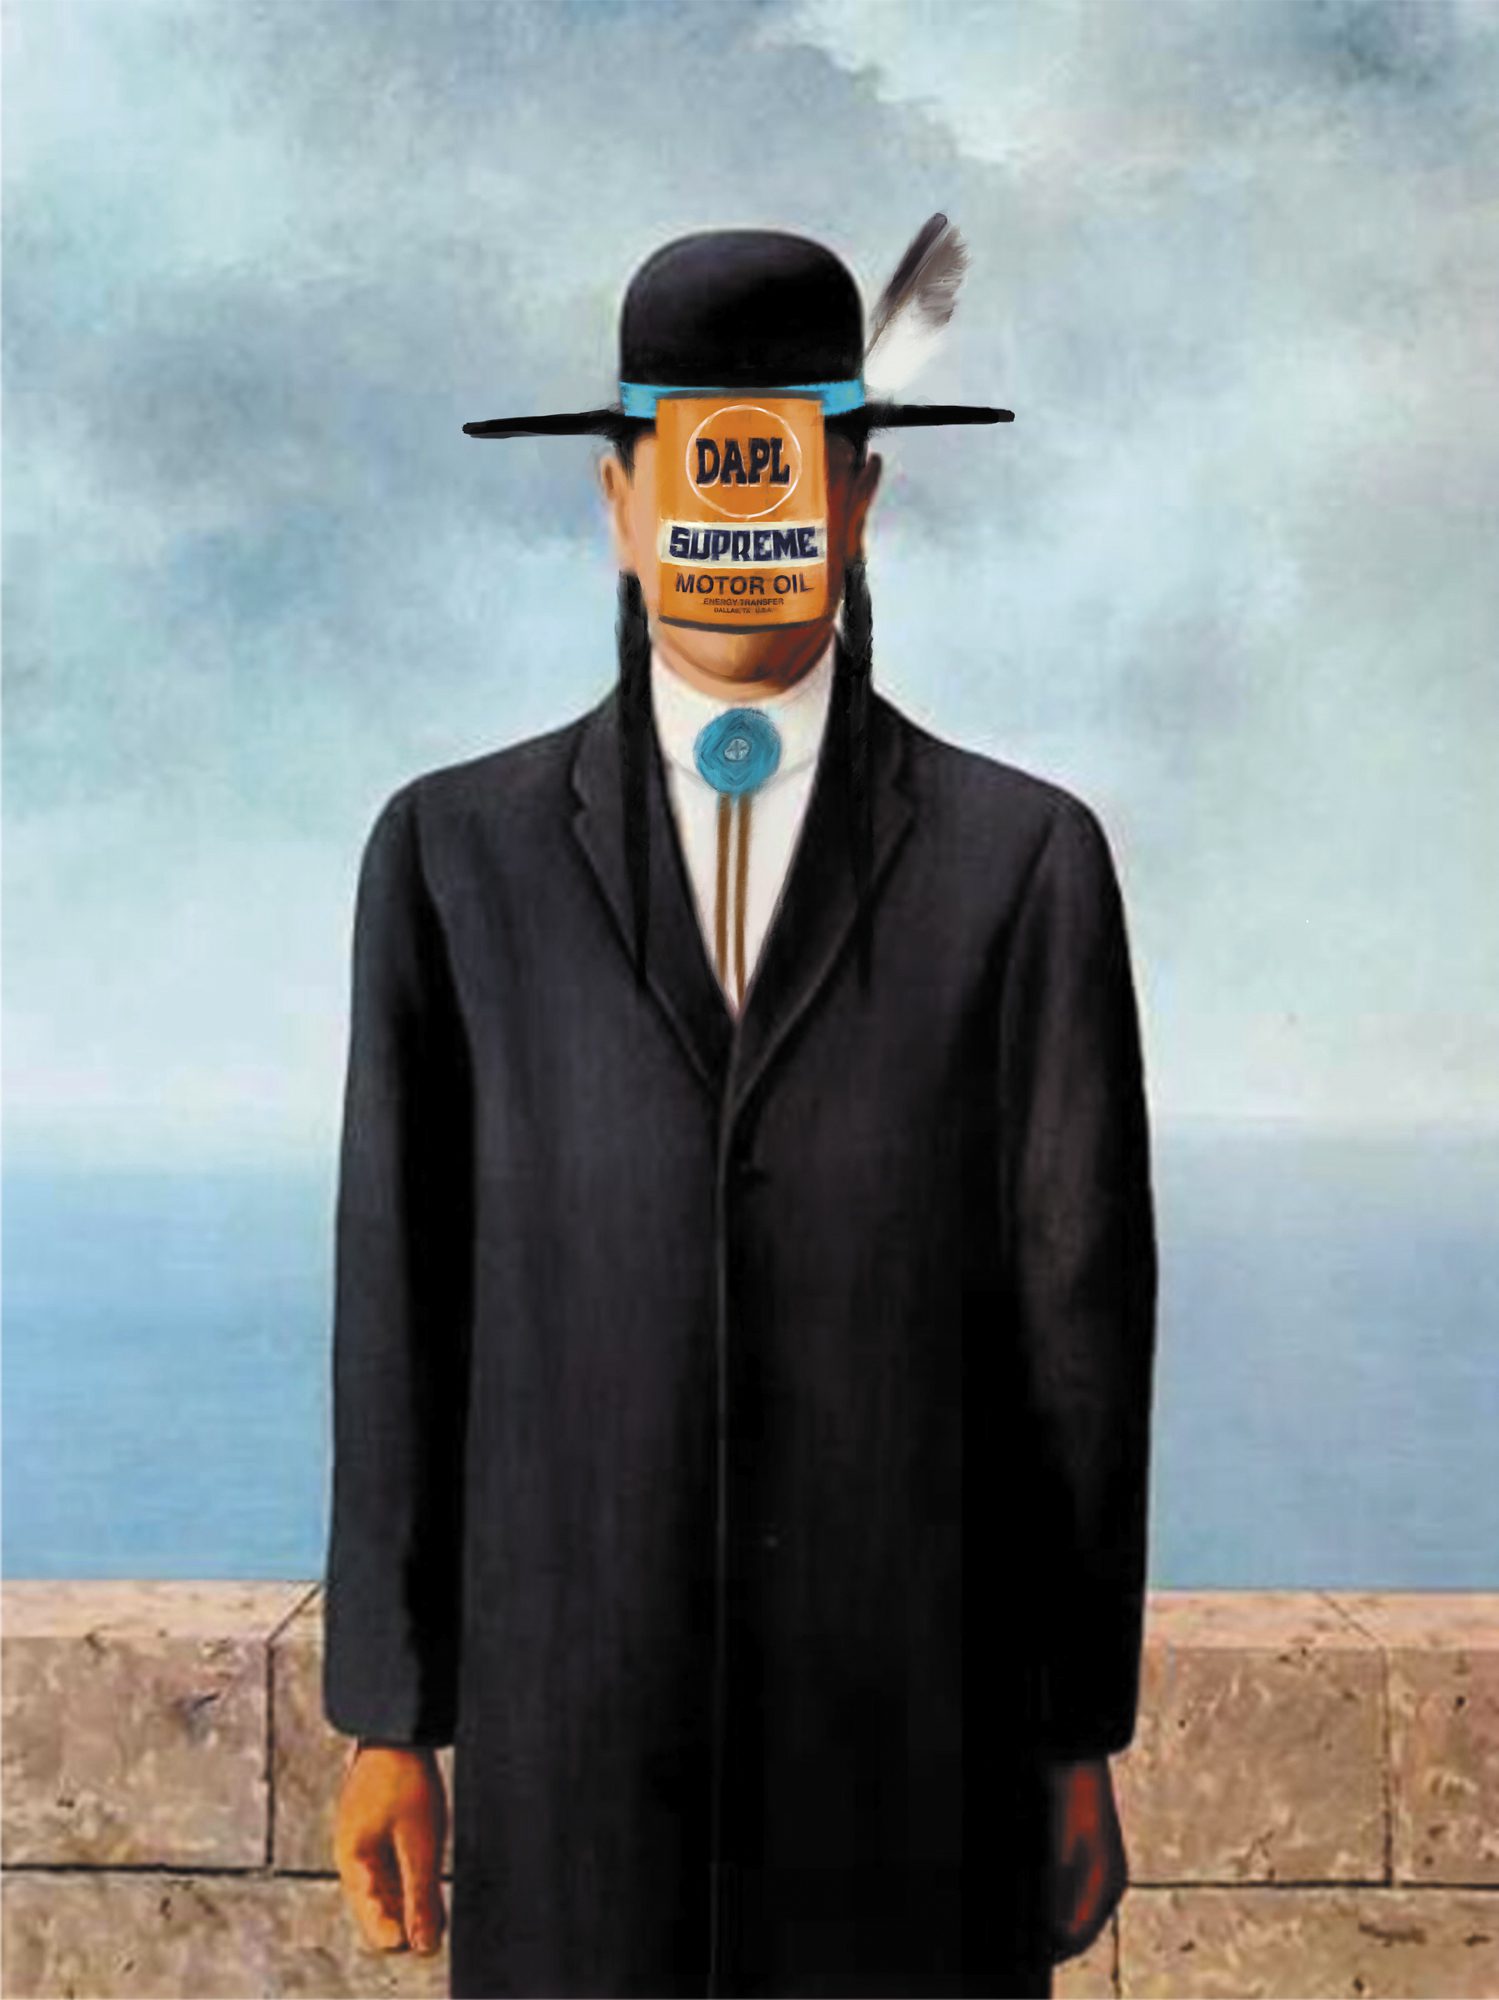 Gregg Deal, version of Son of Man by René Magritte, created during NoDAPL on Standing Rock (2016) 